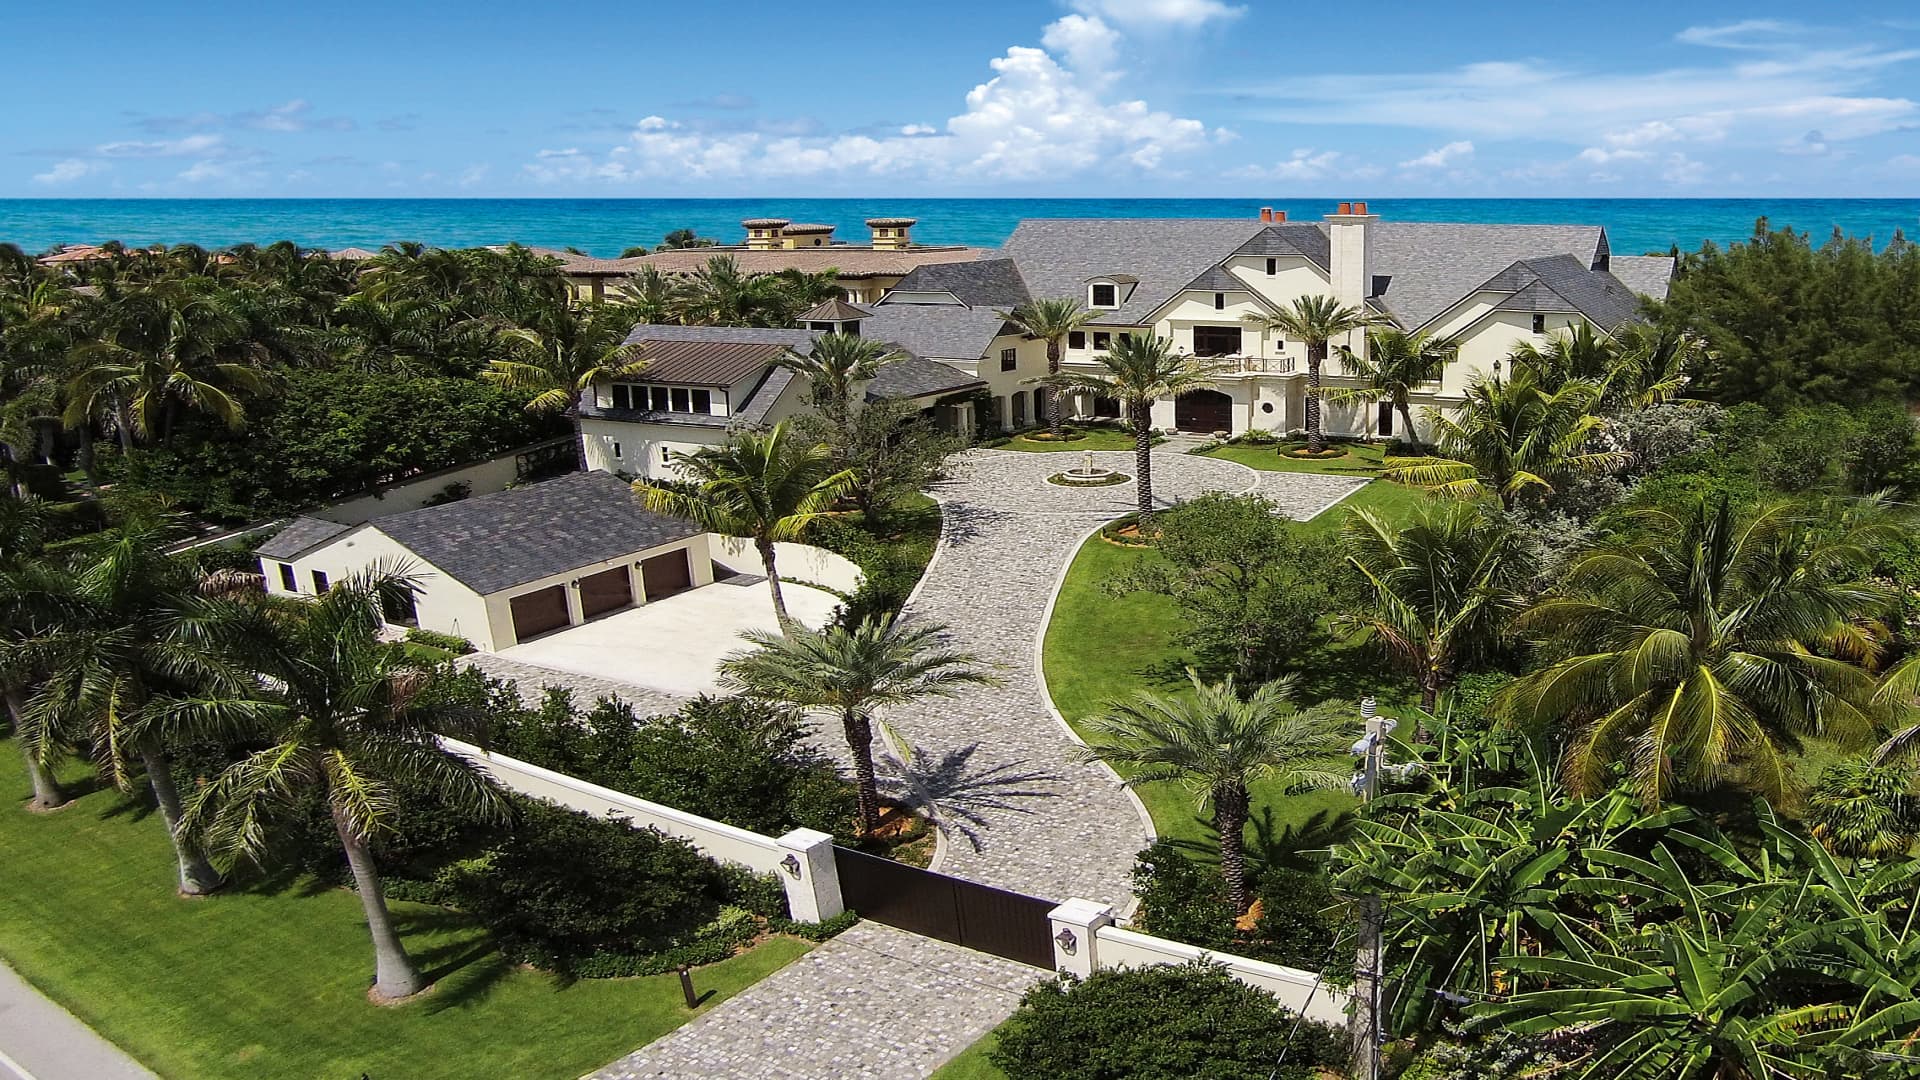 Here are the 5 hottest luxury actual estate markets in South Florida